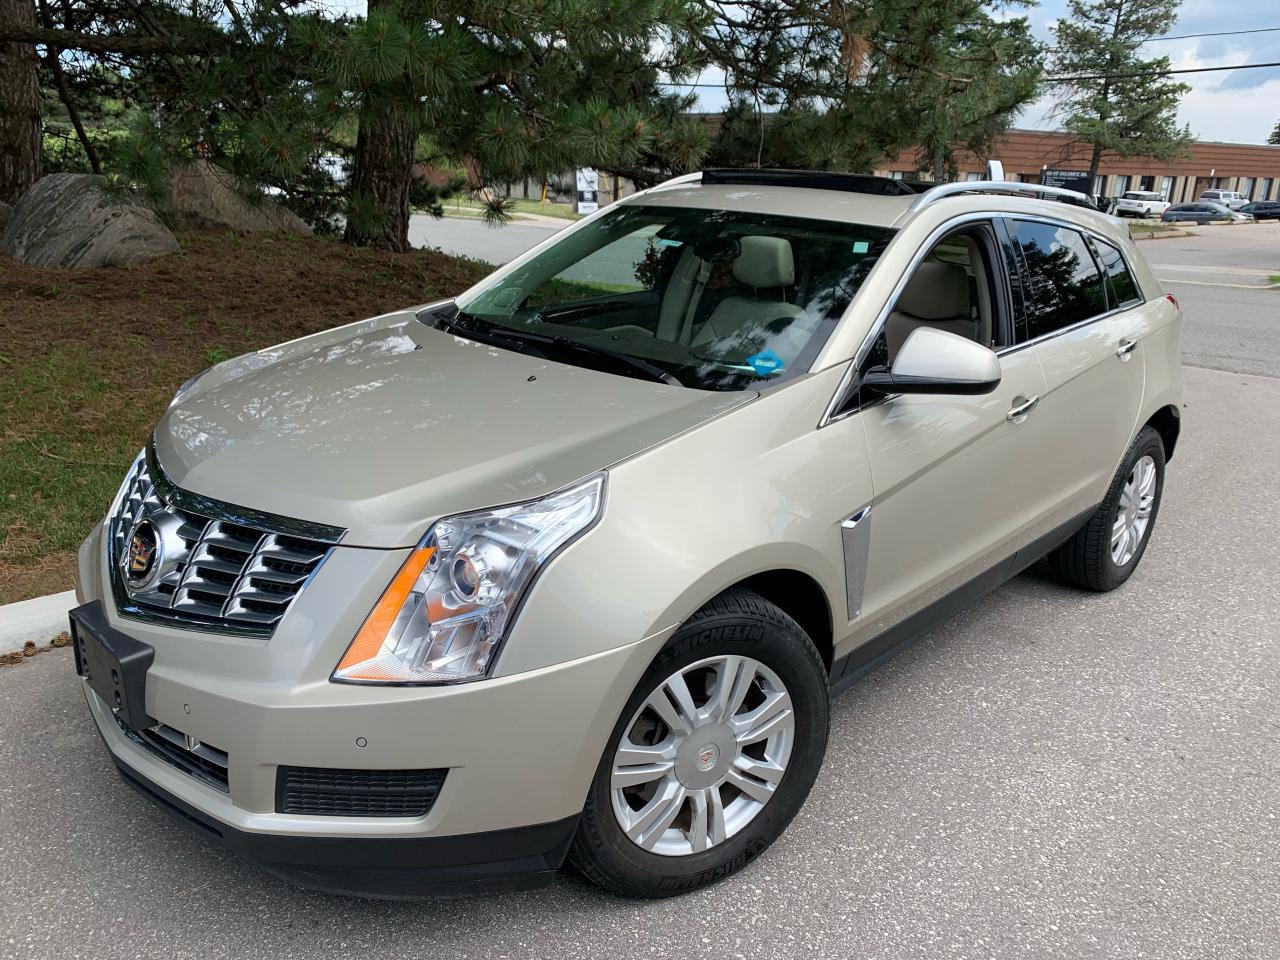 2015 Cadillac SRX LUXURY-ONLY 31,474 KMS!! 1 SENIOR OWNER! NO CLAIMS - Photo #4